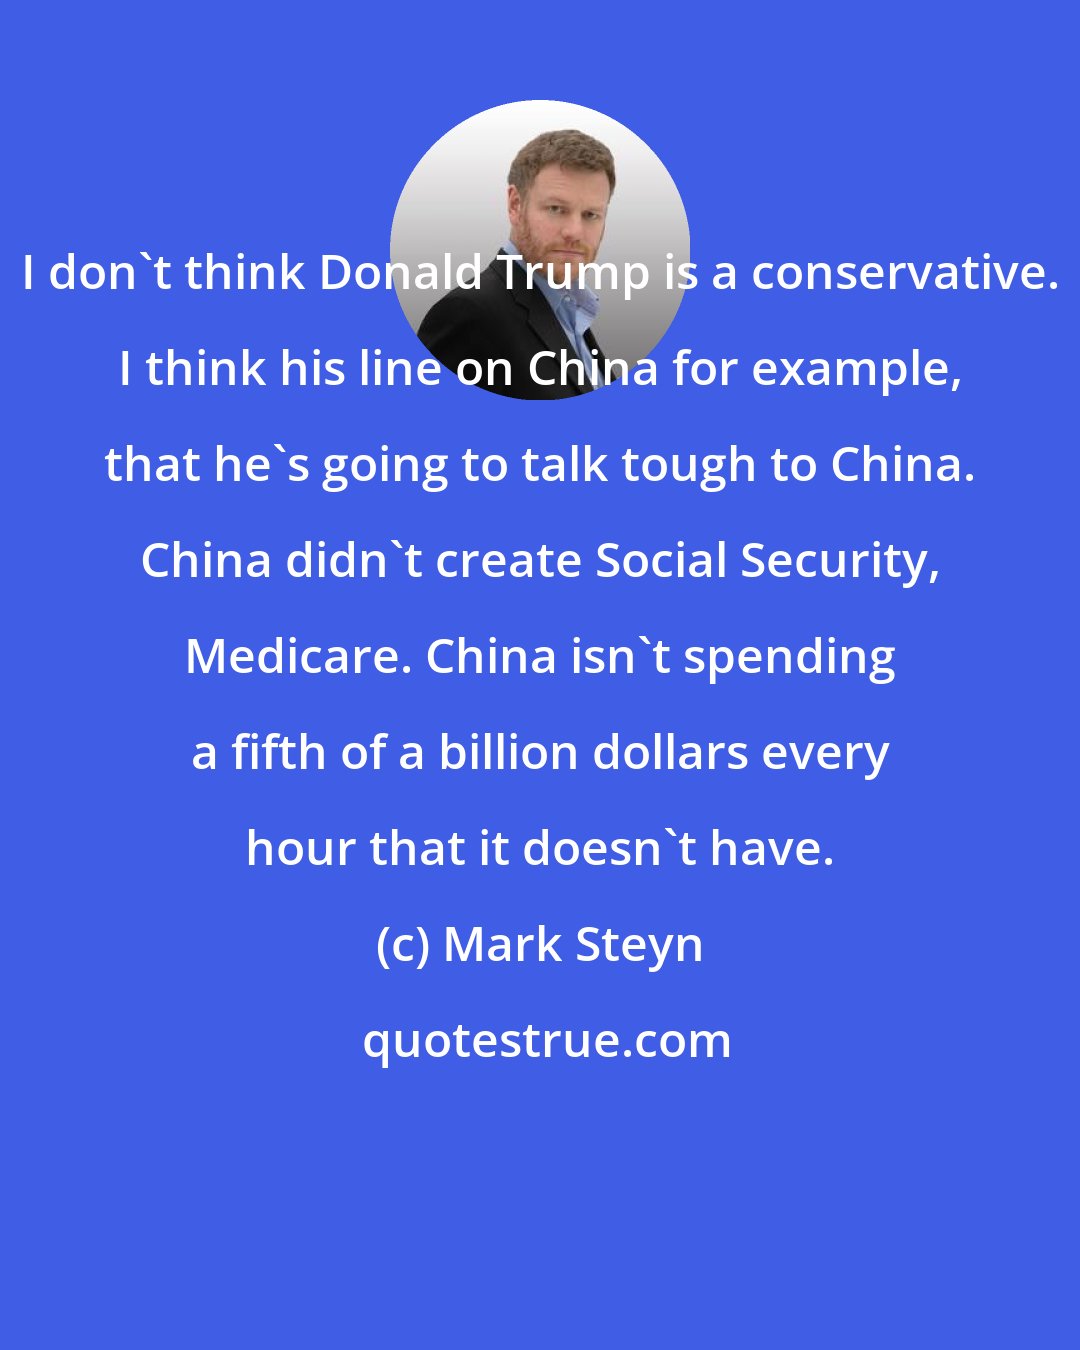 Mark Steyn: I don't think Donald Trump is a conservative. I think his line on China for example, that he's going to talk tough to China. China didn't create Social Security, Medicare. China isn't spending a fifth of a billion dollars every hour that it doesn't have.